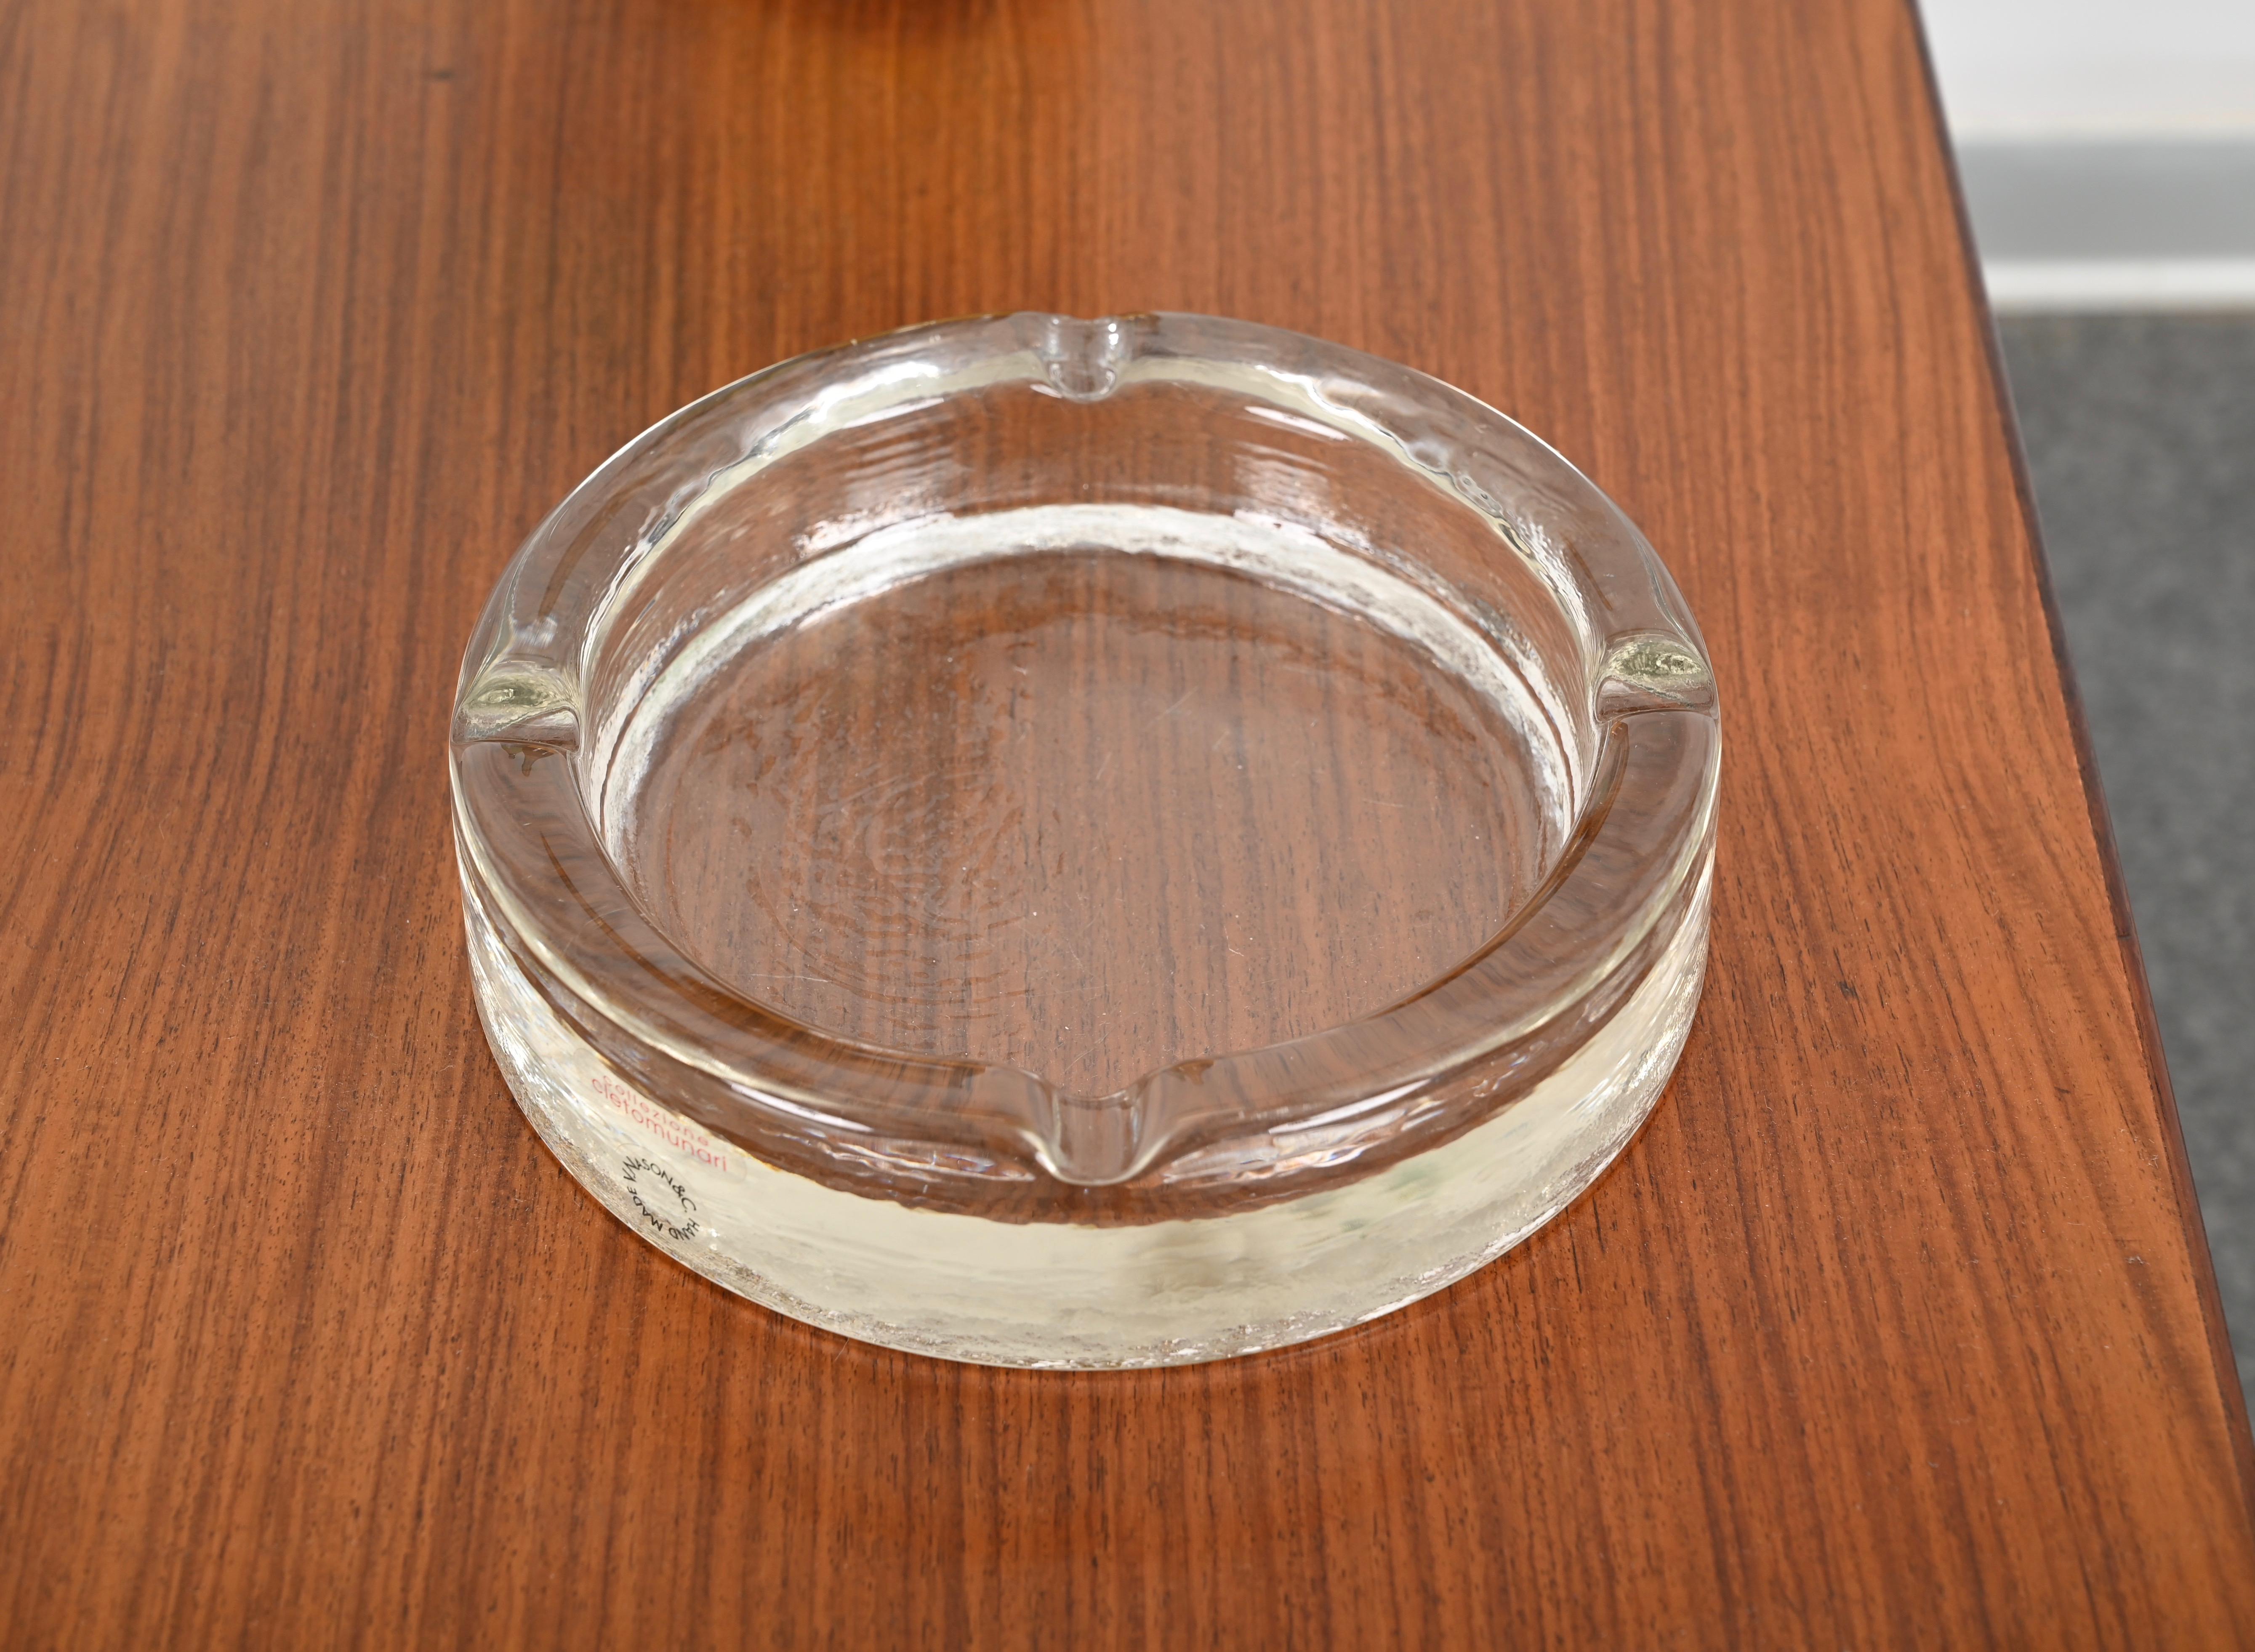 Fantastic Murano ice glass ashtray designed by Cleto Munari and produced by Nason in Italy during the 1980s. This gorgeous large ashtray is in amazing conditions and still has its original label in perfect conditions as well. 

This stunning art